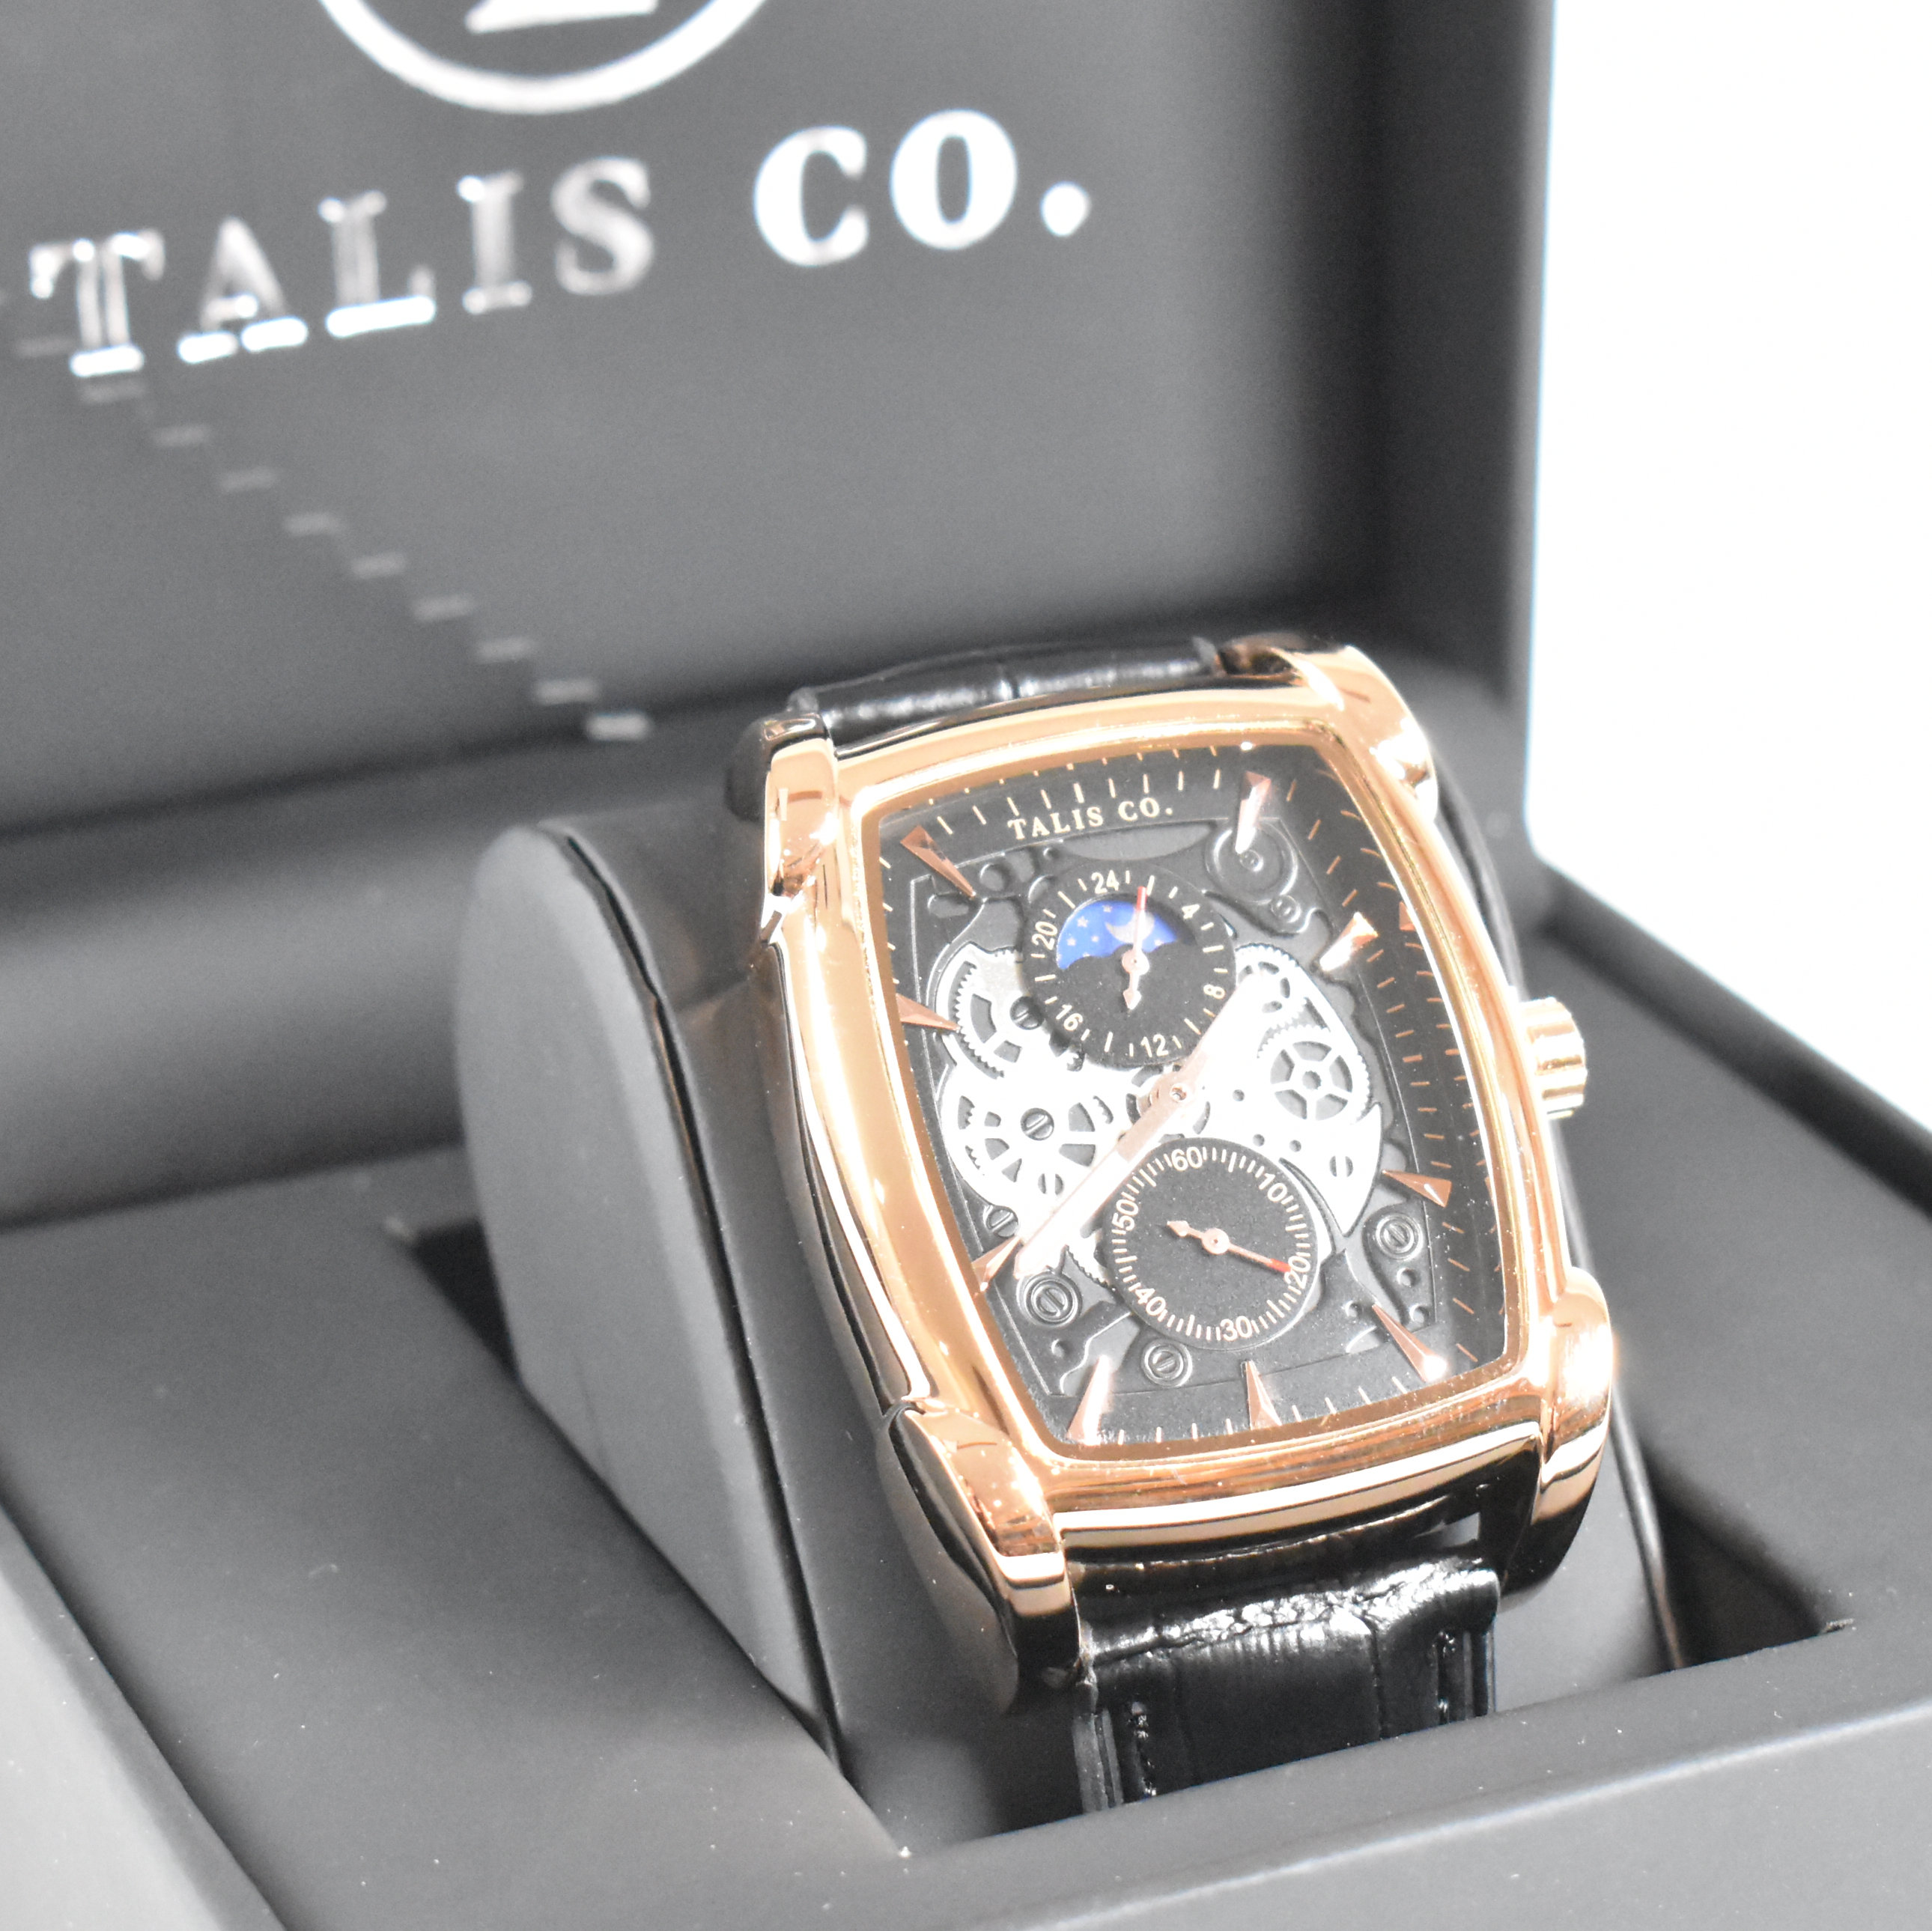 MENS TALIS CO WRIST WATCH - Image 3 of 5